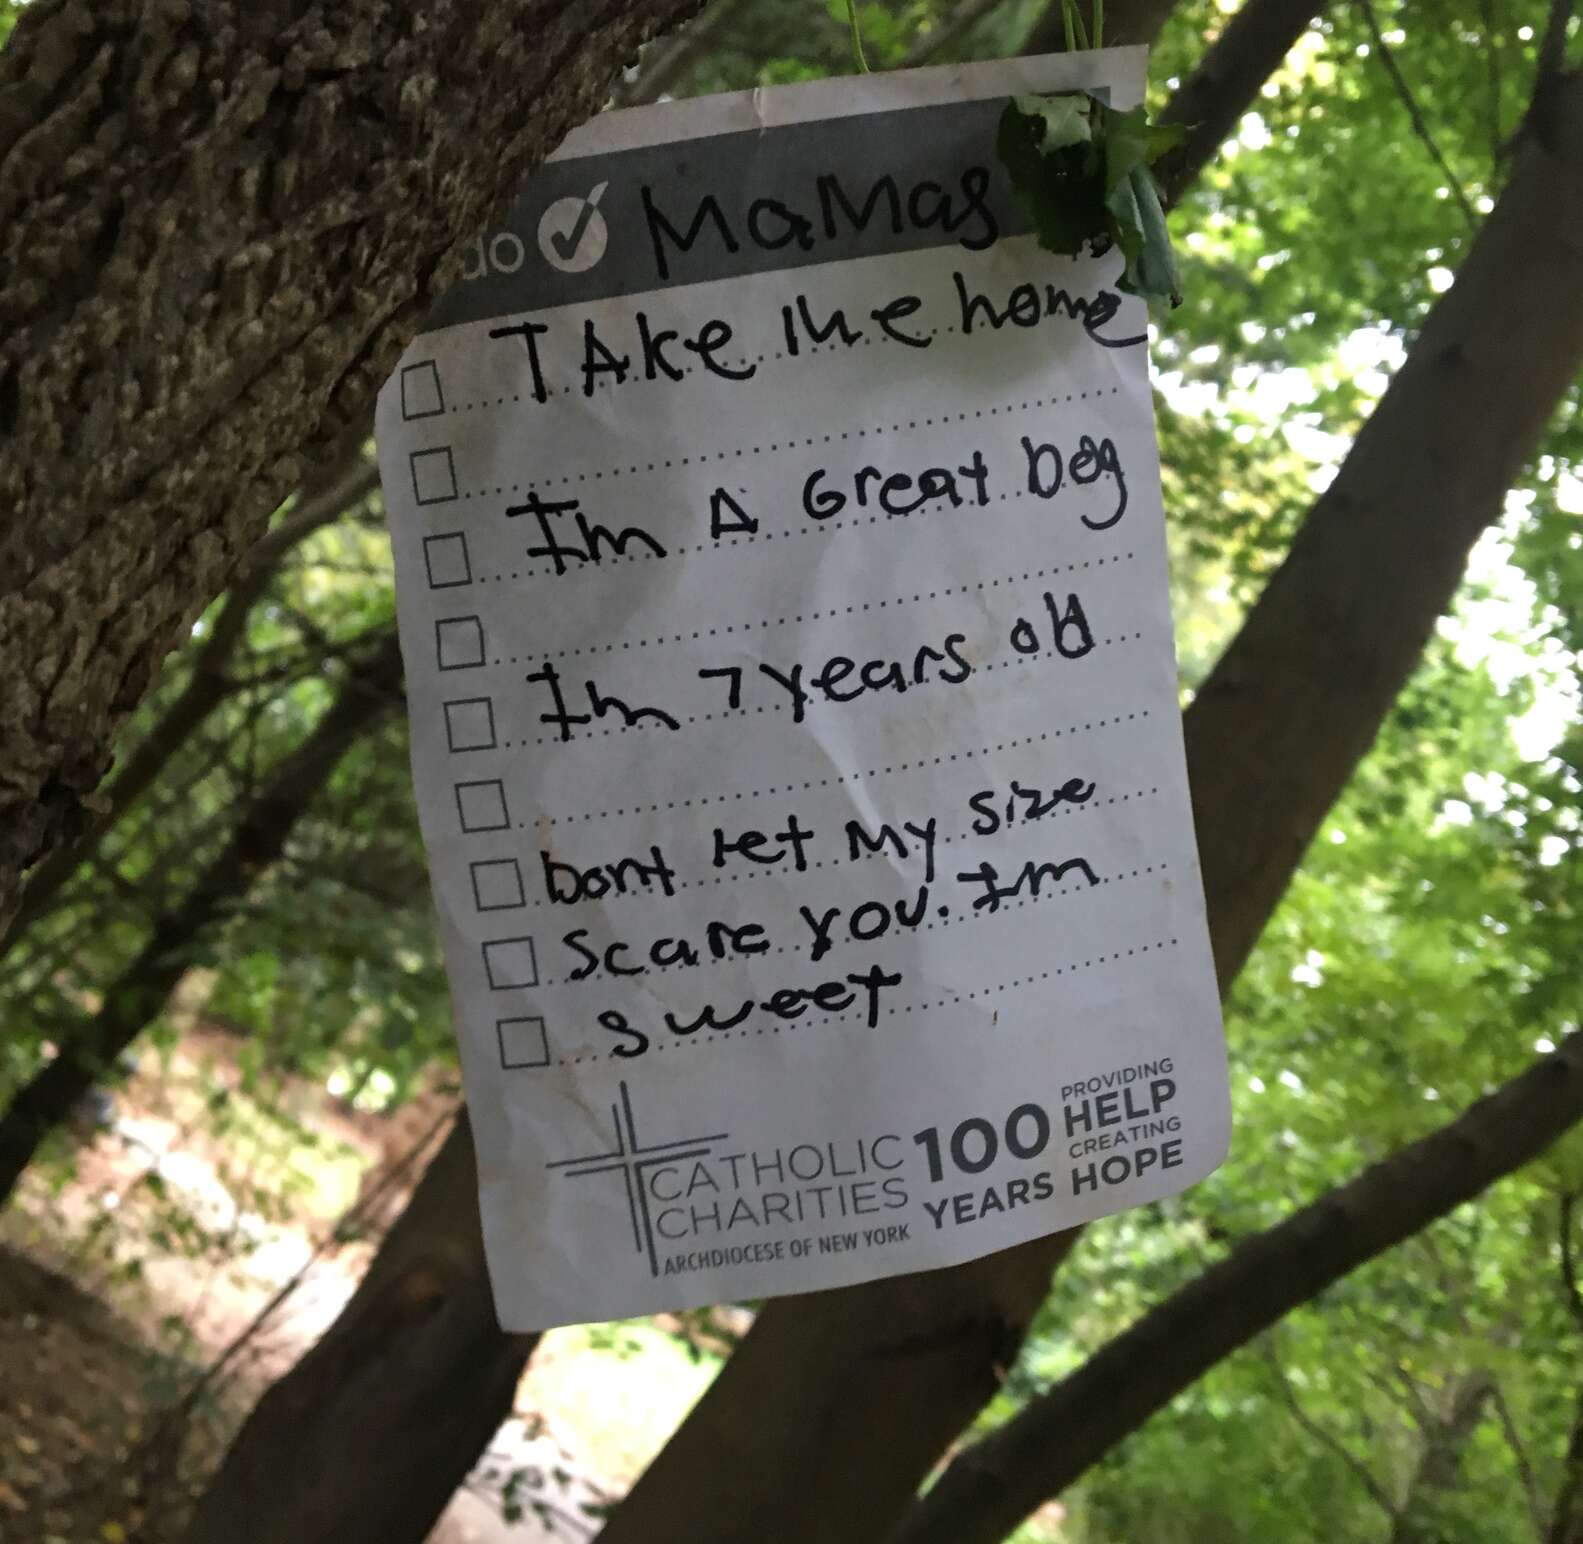 Sweet Pit bull tied to a tree in the park with a note